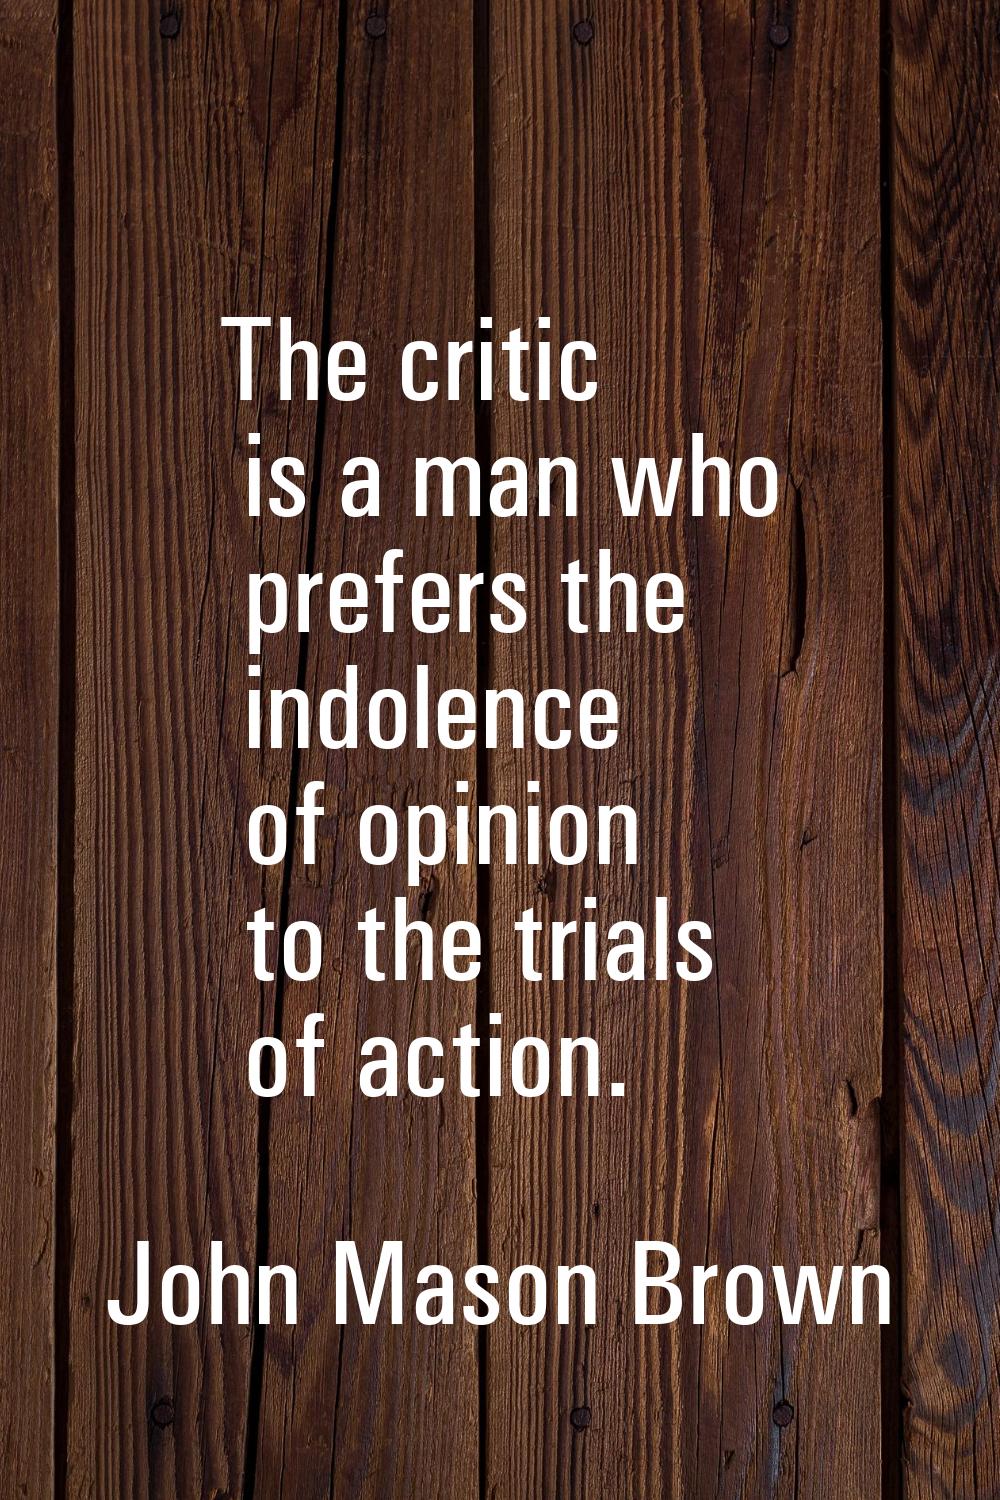 The critic is a man who prefers the indolence of opinion to the trials of action.